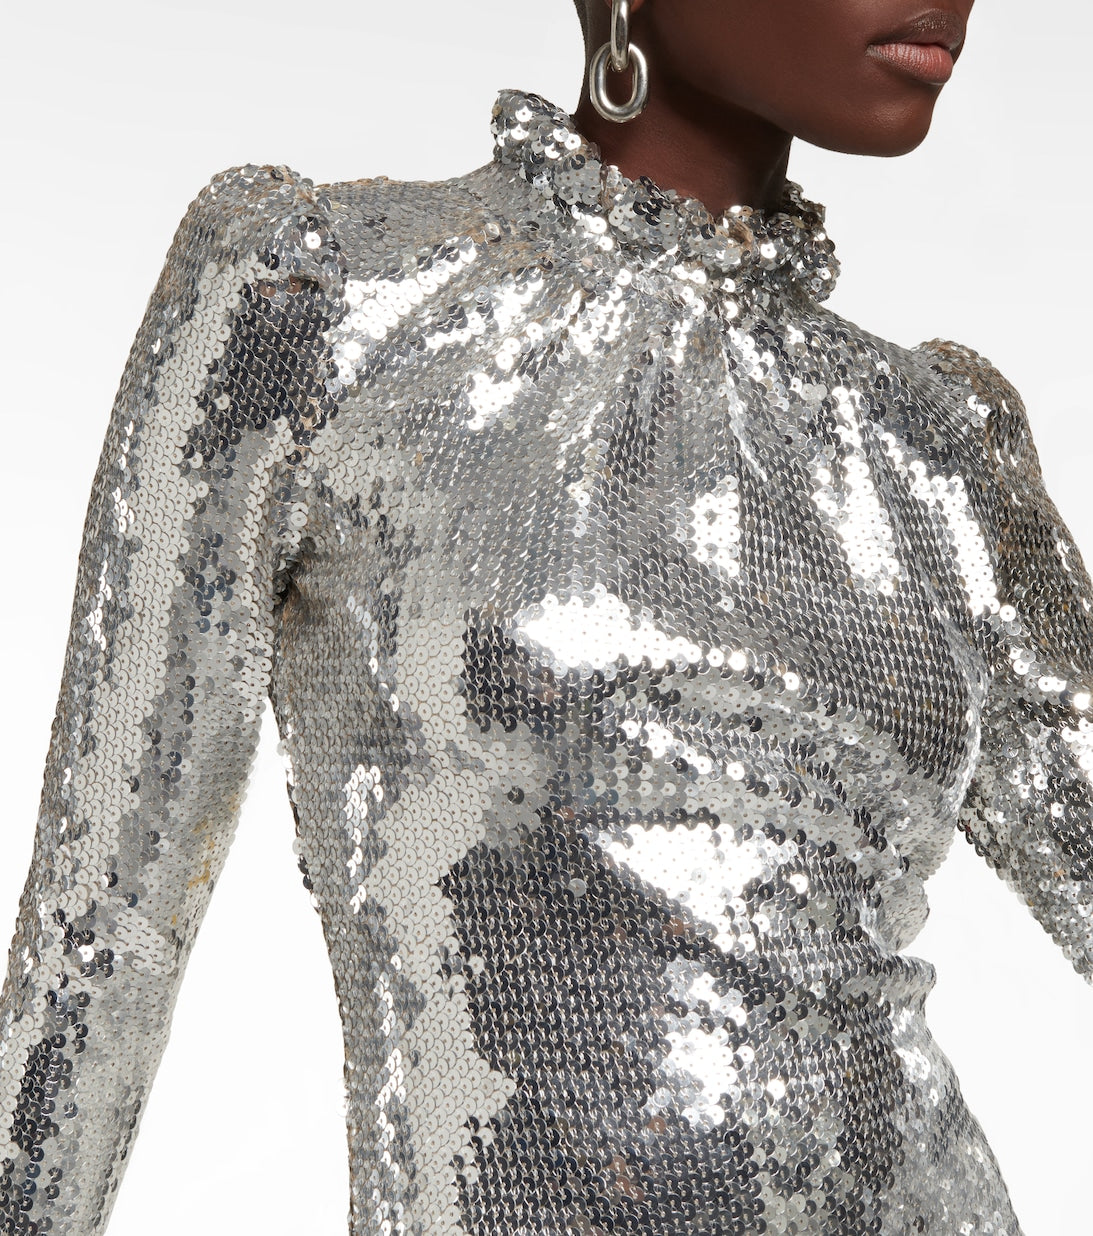 PACO RABANNE RUFFLE-TRIMMED SEQUINED MINIDRESS